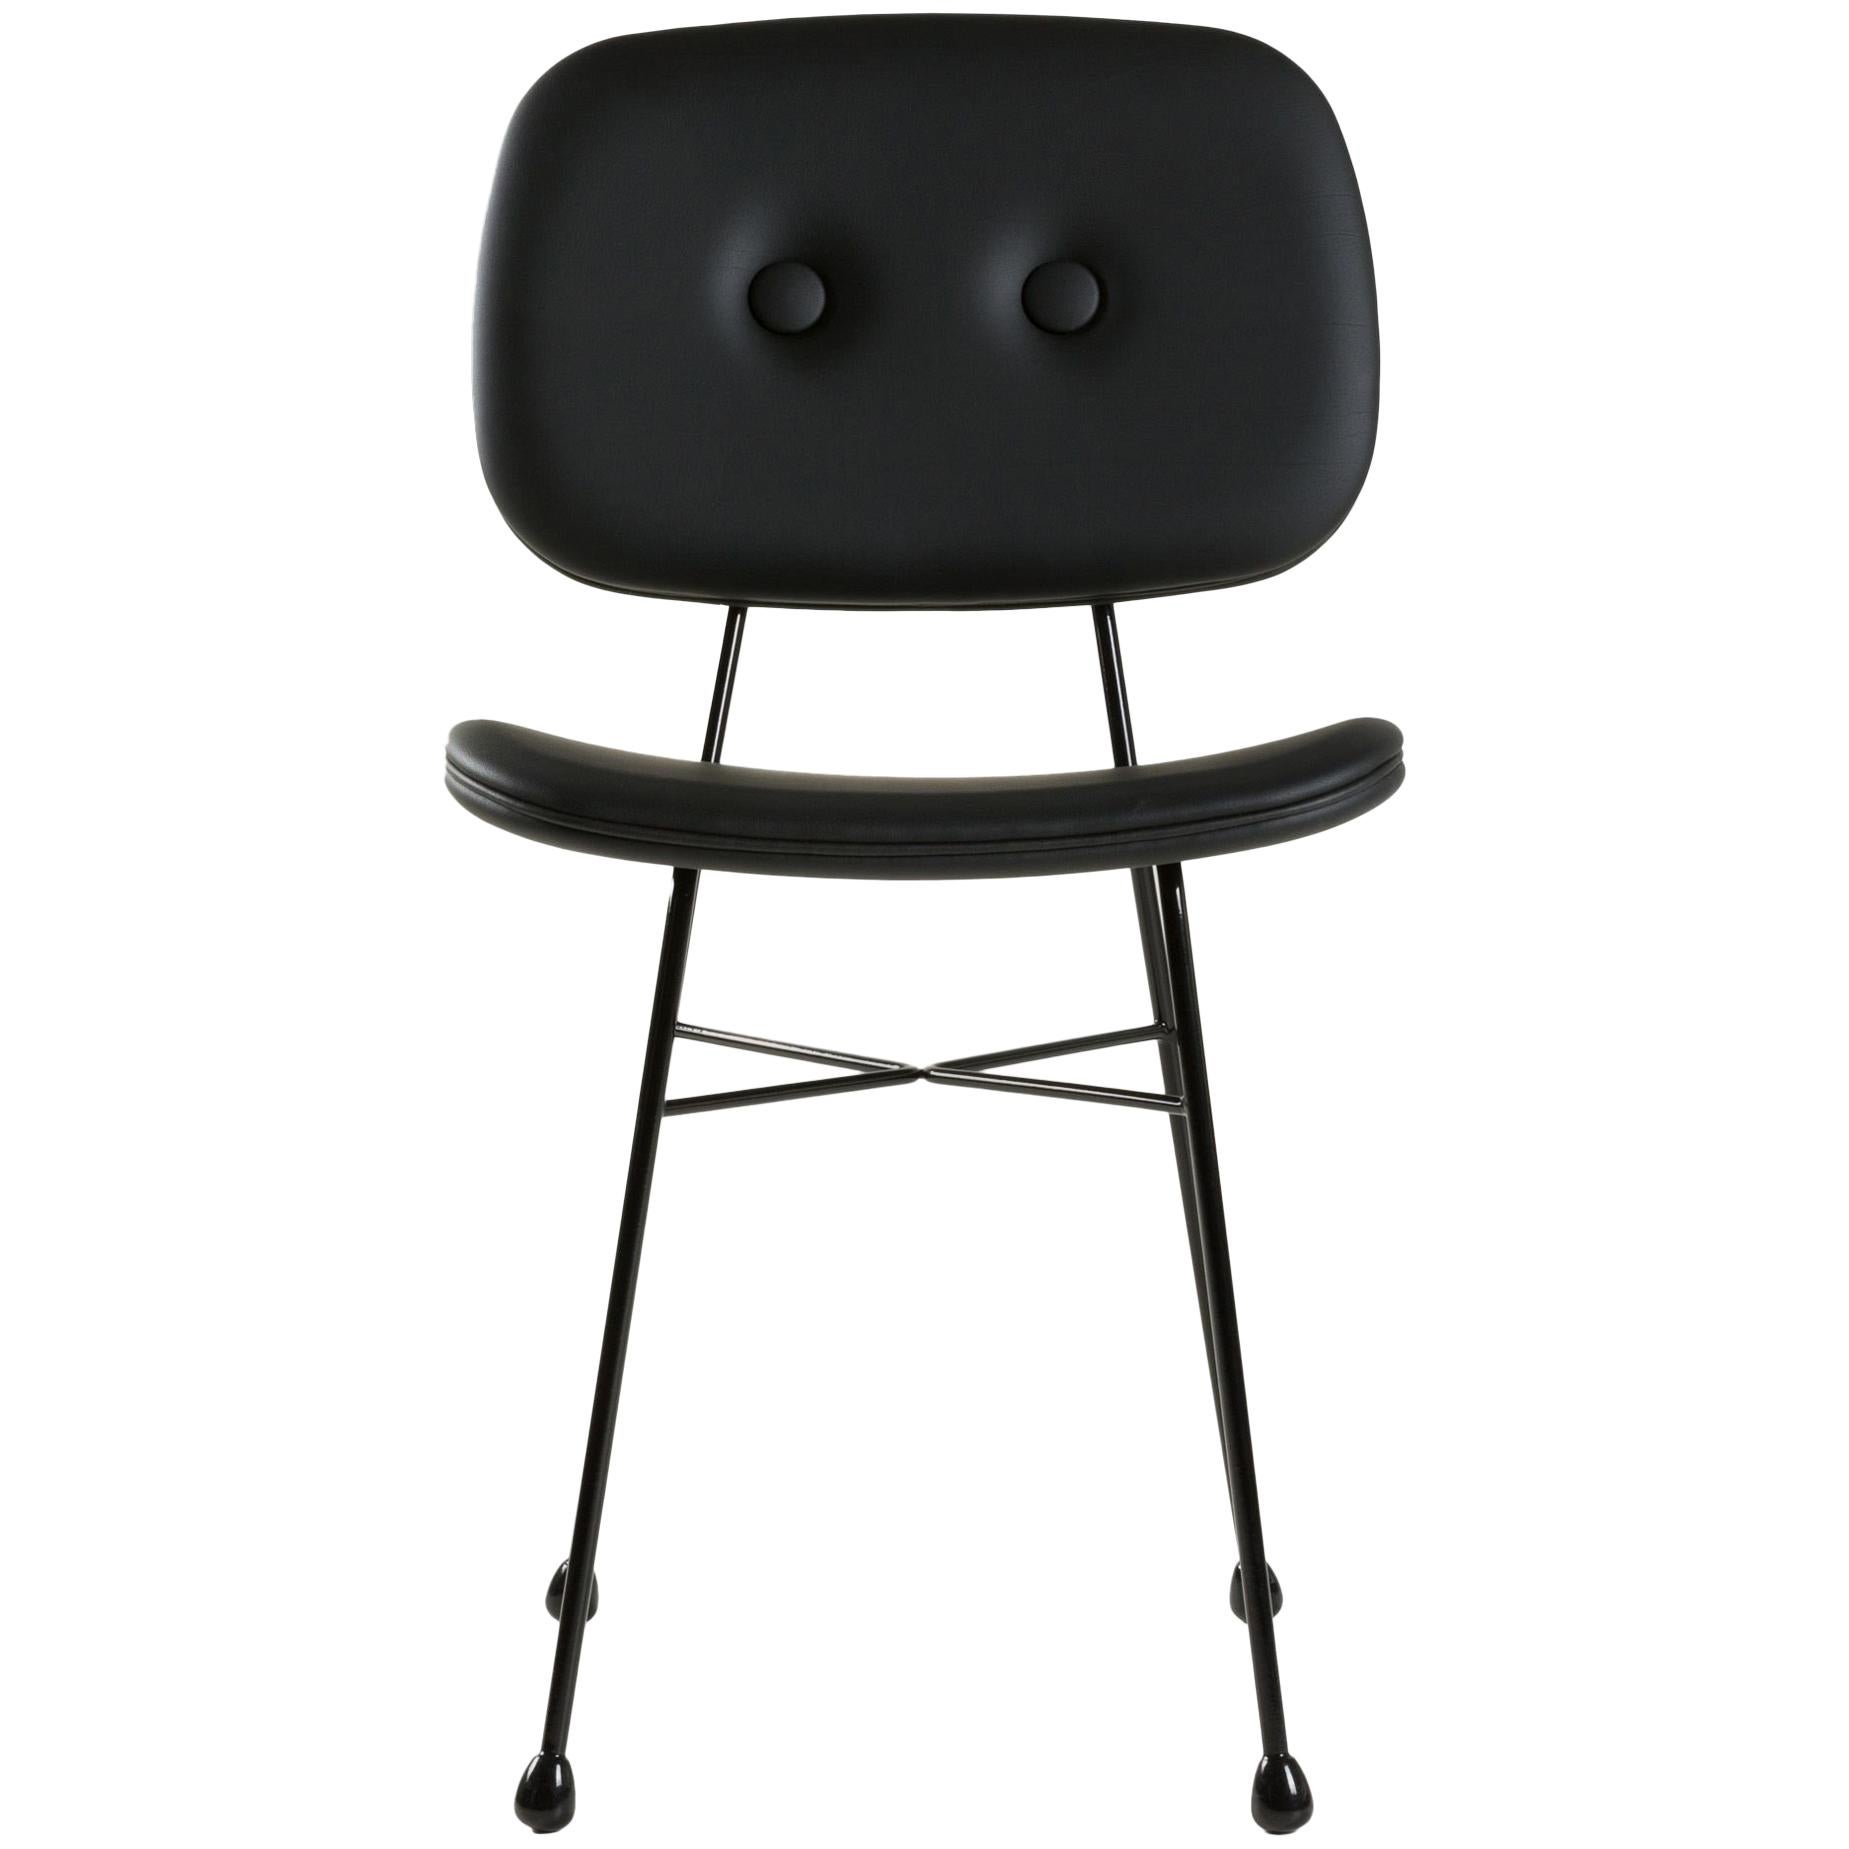 Moooi "The Golden Chair" in Matt Black Synthetic Leather and Black Steel Frame For Sale